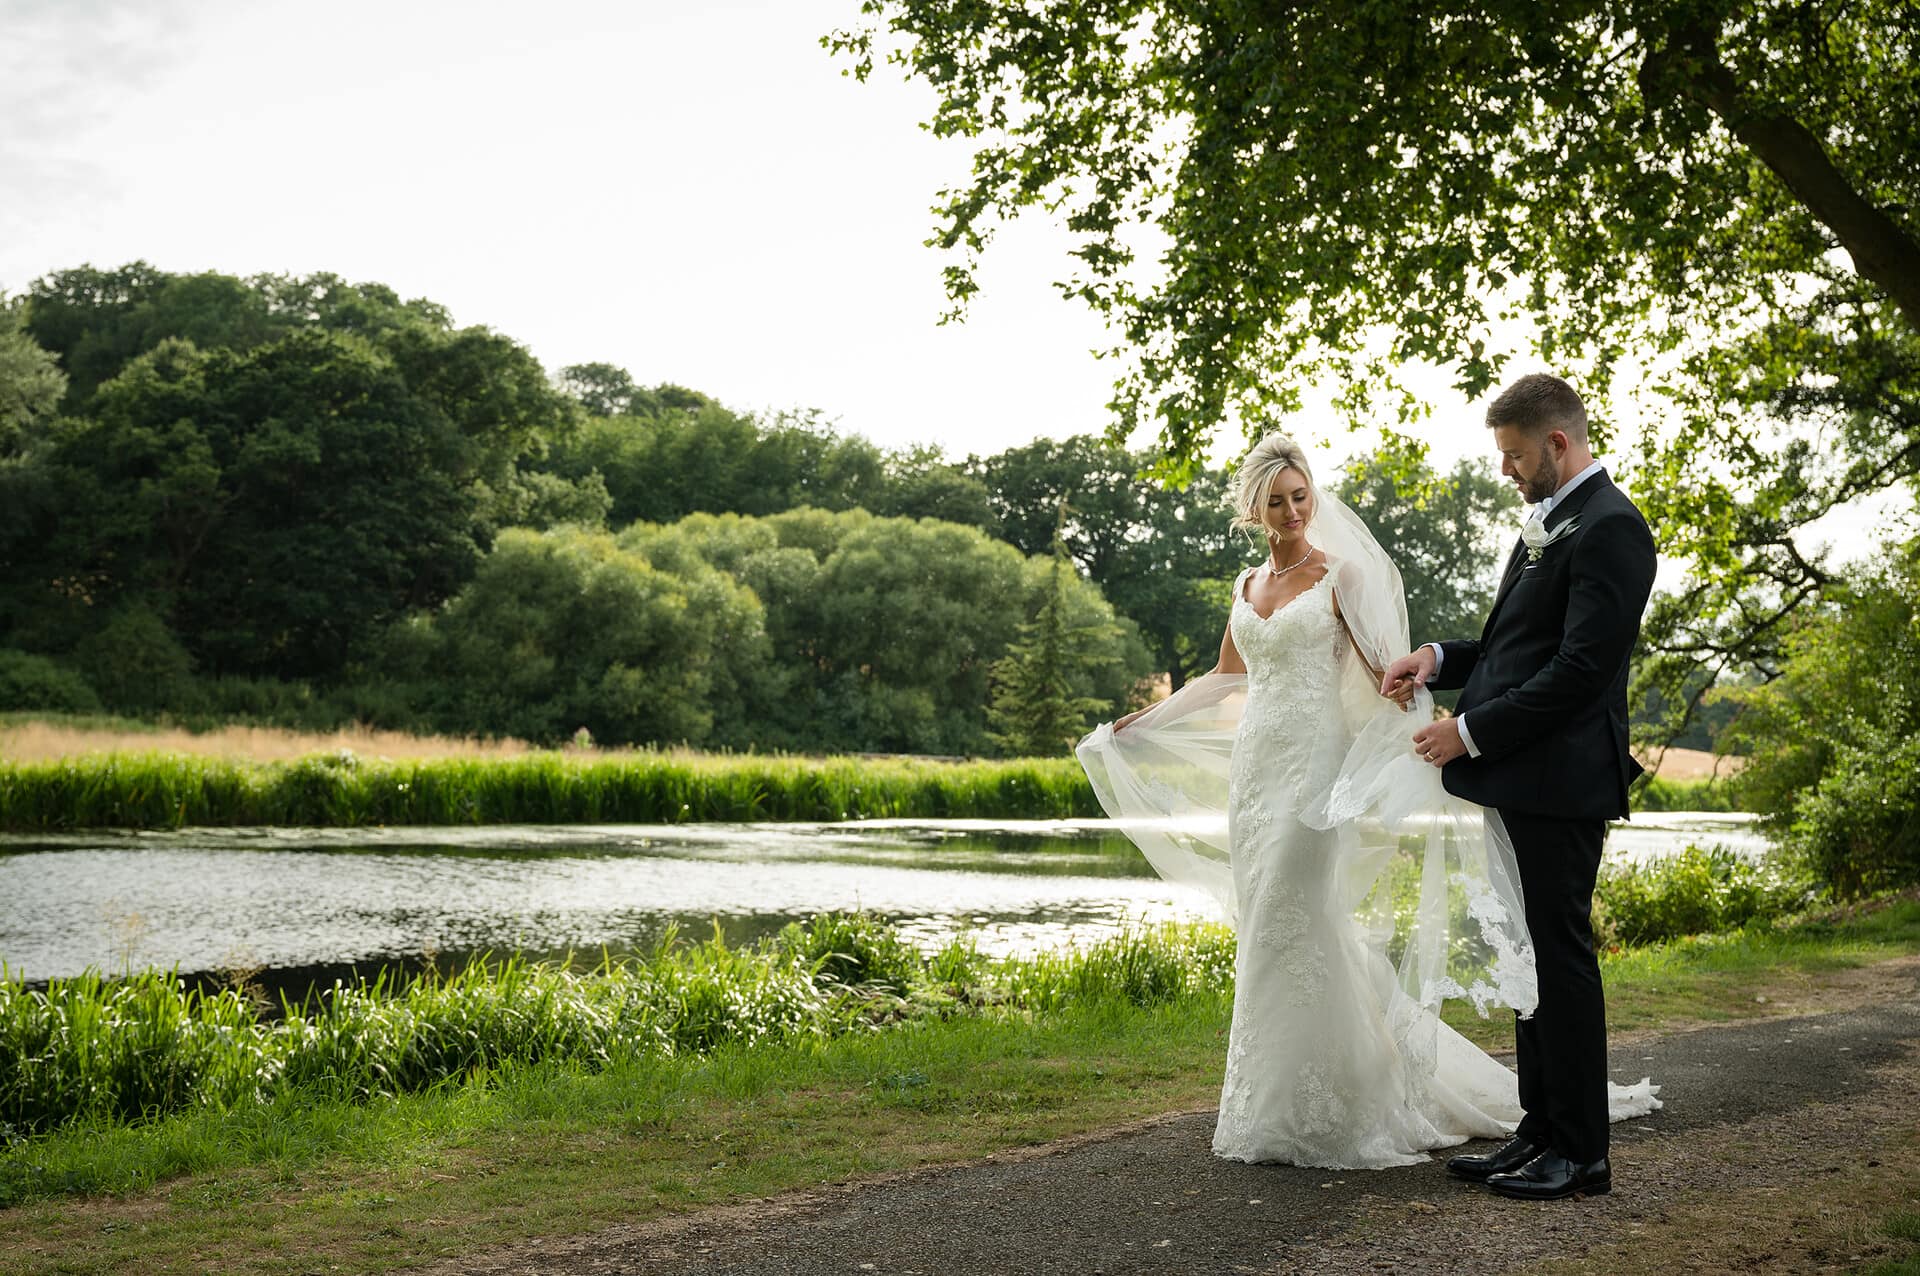 Groom helping bride with her veil as they walk along a lakeside path